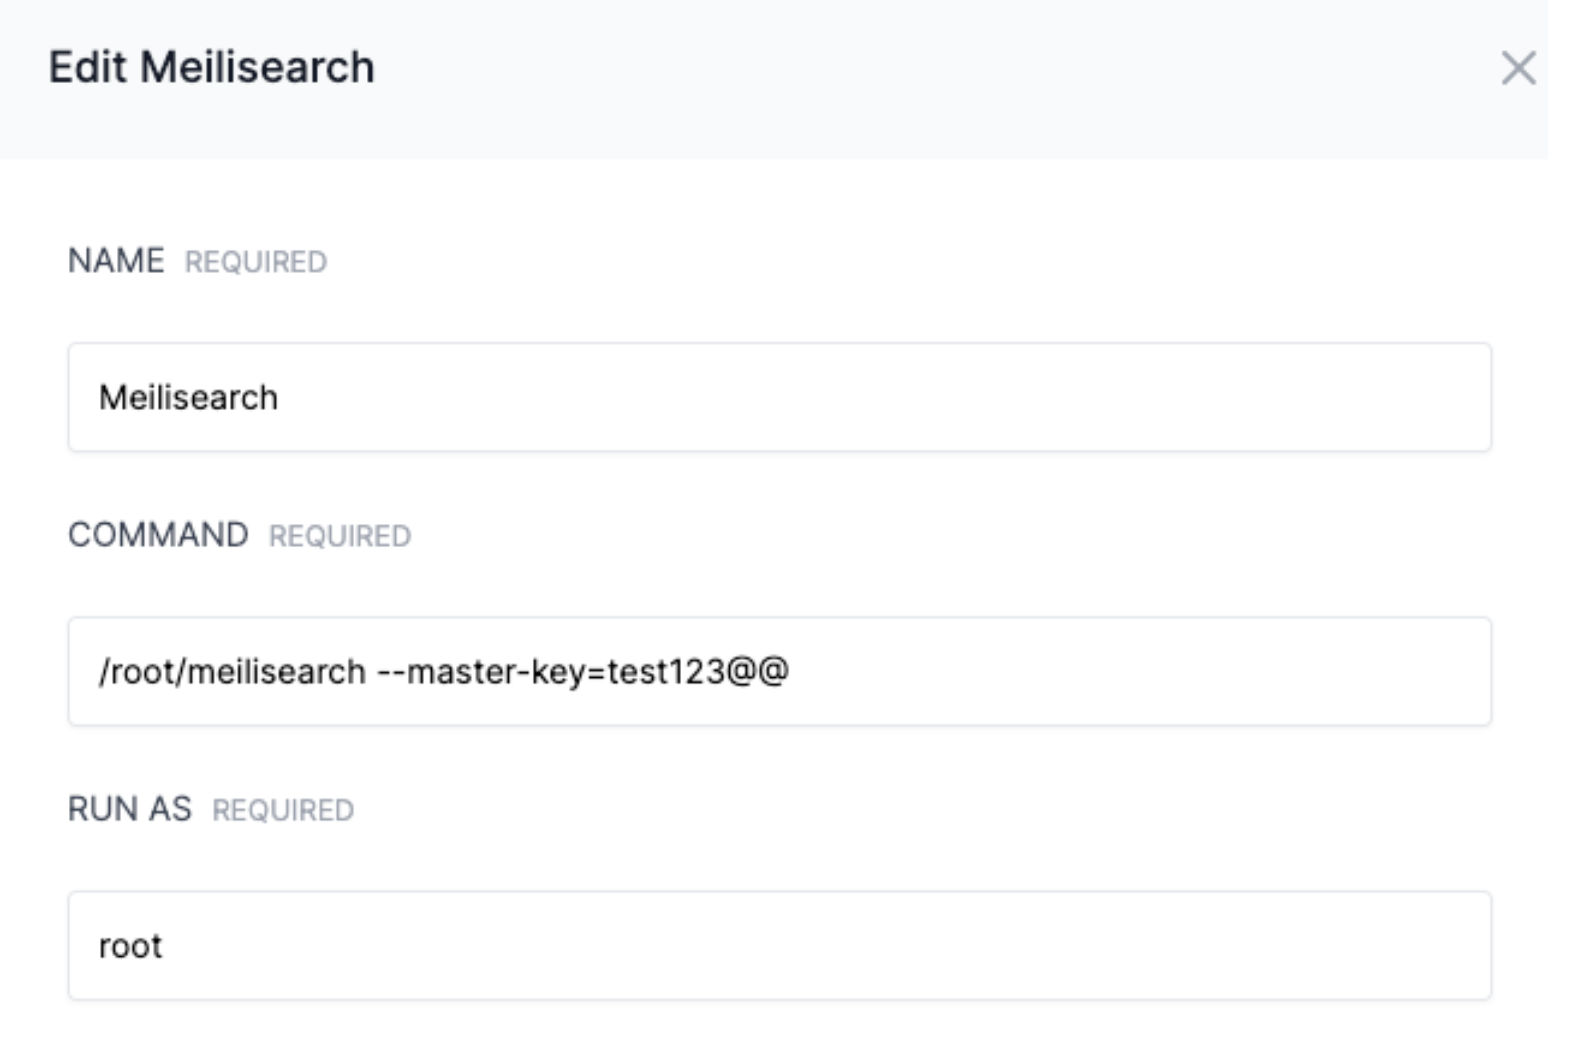 add a new process monitor for meilisearch